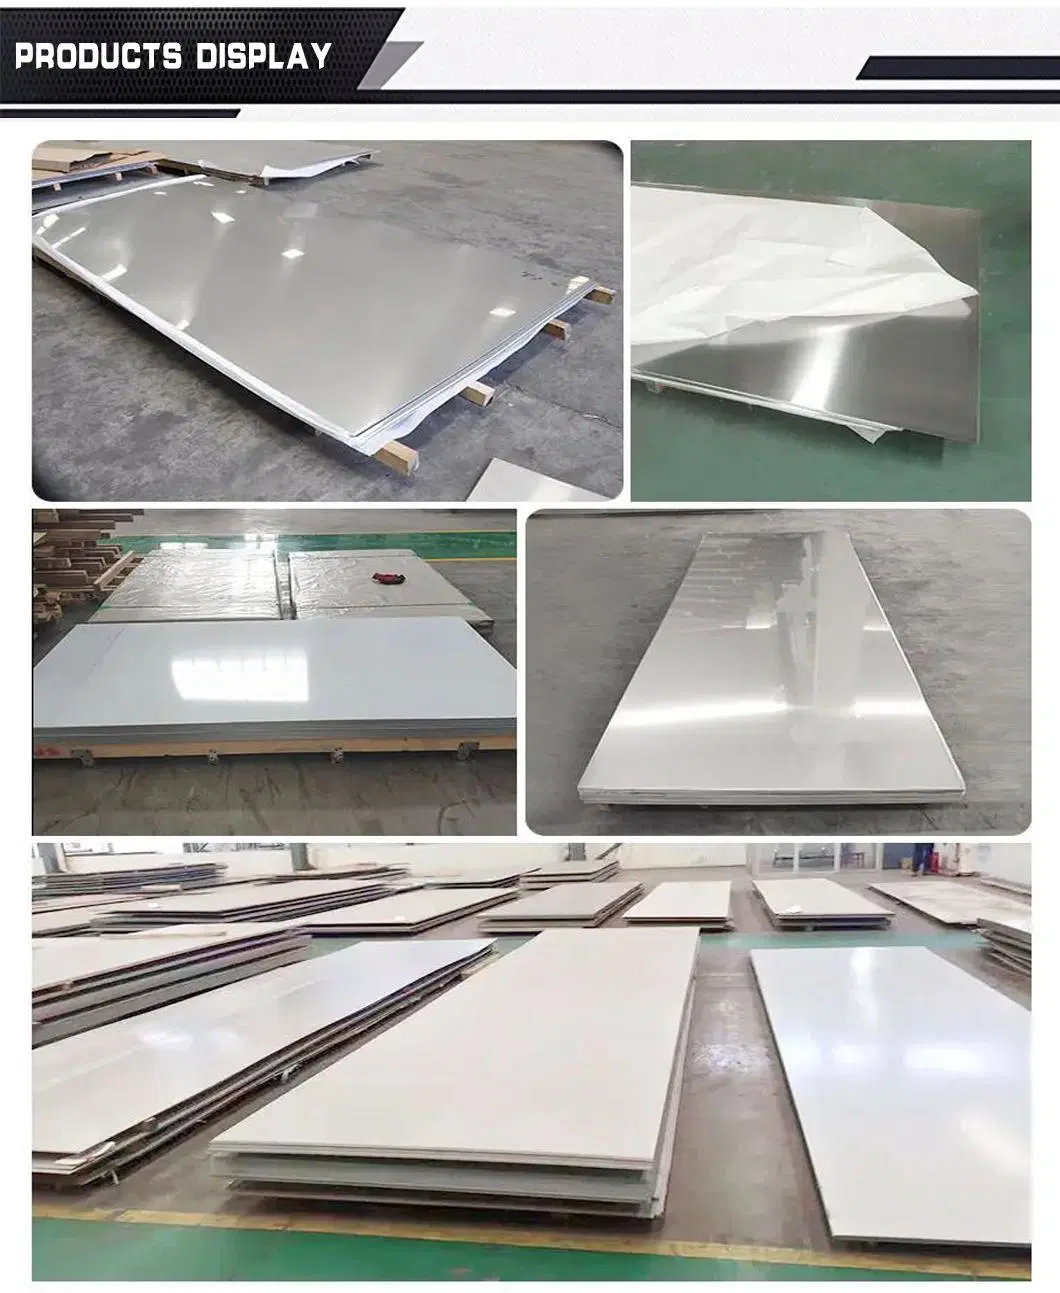 99.9% Pure Nickel 201 Alloy 75/25 CuNi Fit Plus 20 Kg Copper Nickel Alloy Cupronickel Complete Sheet/Plate Chrome Plating